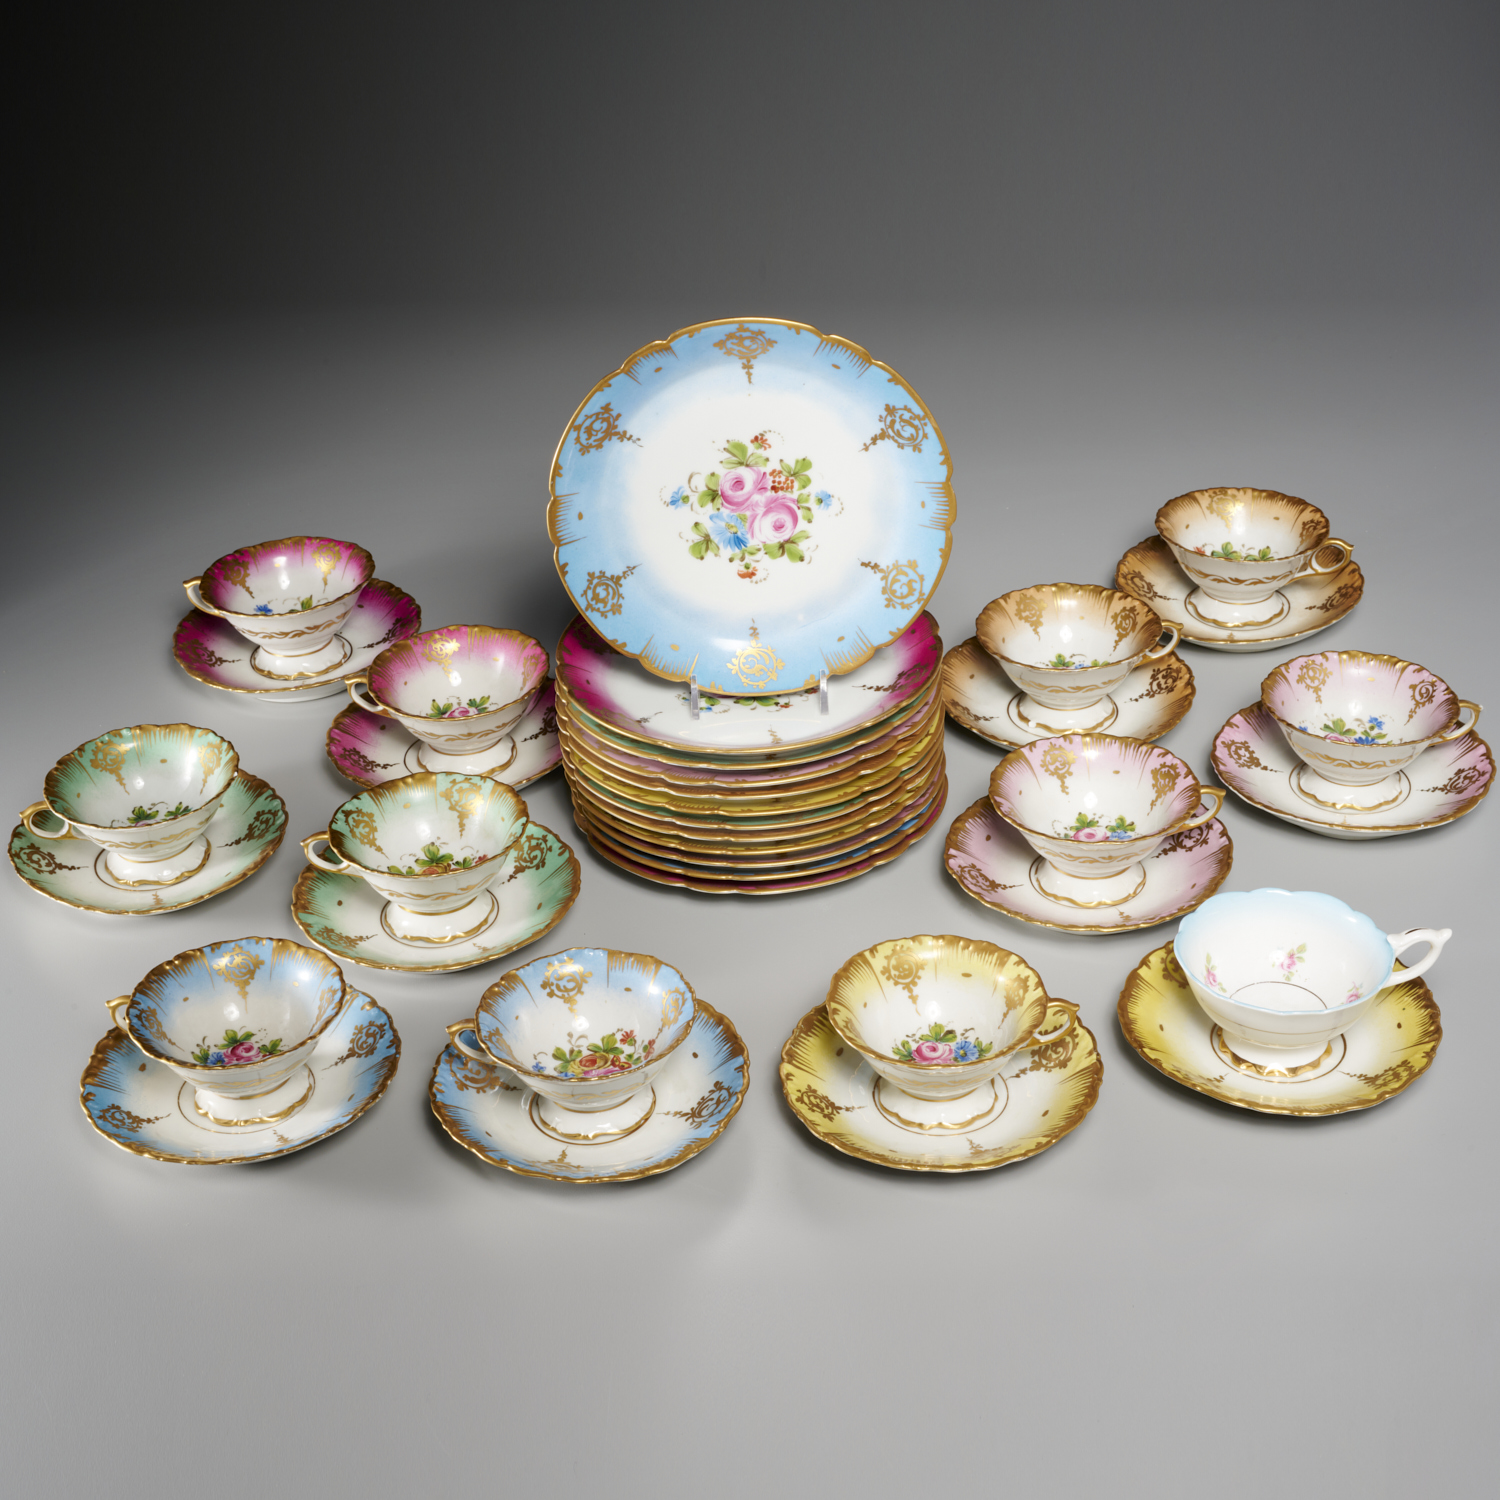 SEVRES STYLE DESSERT SERVICE FOR